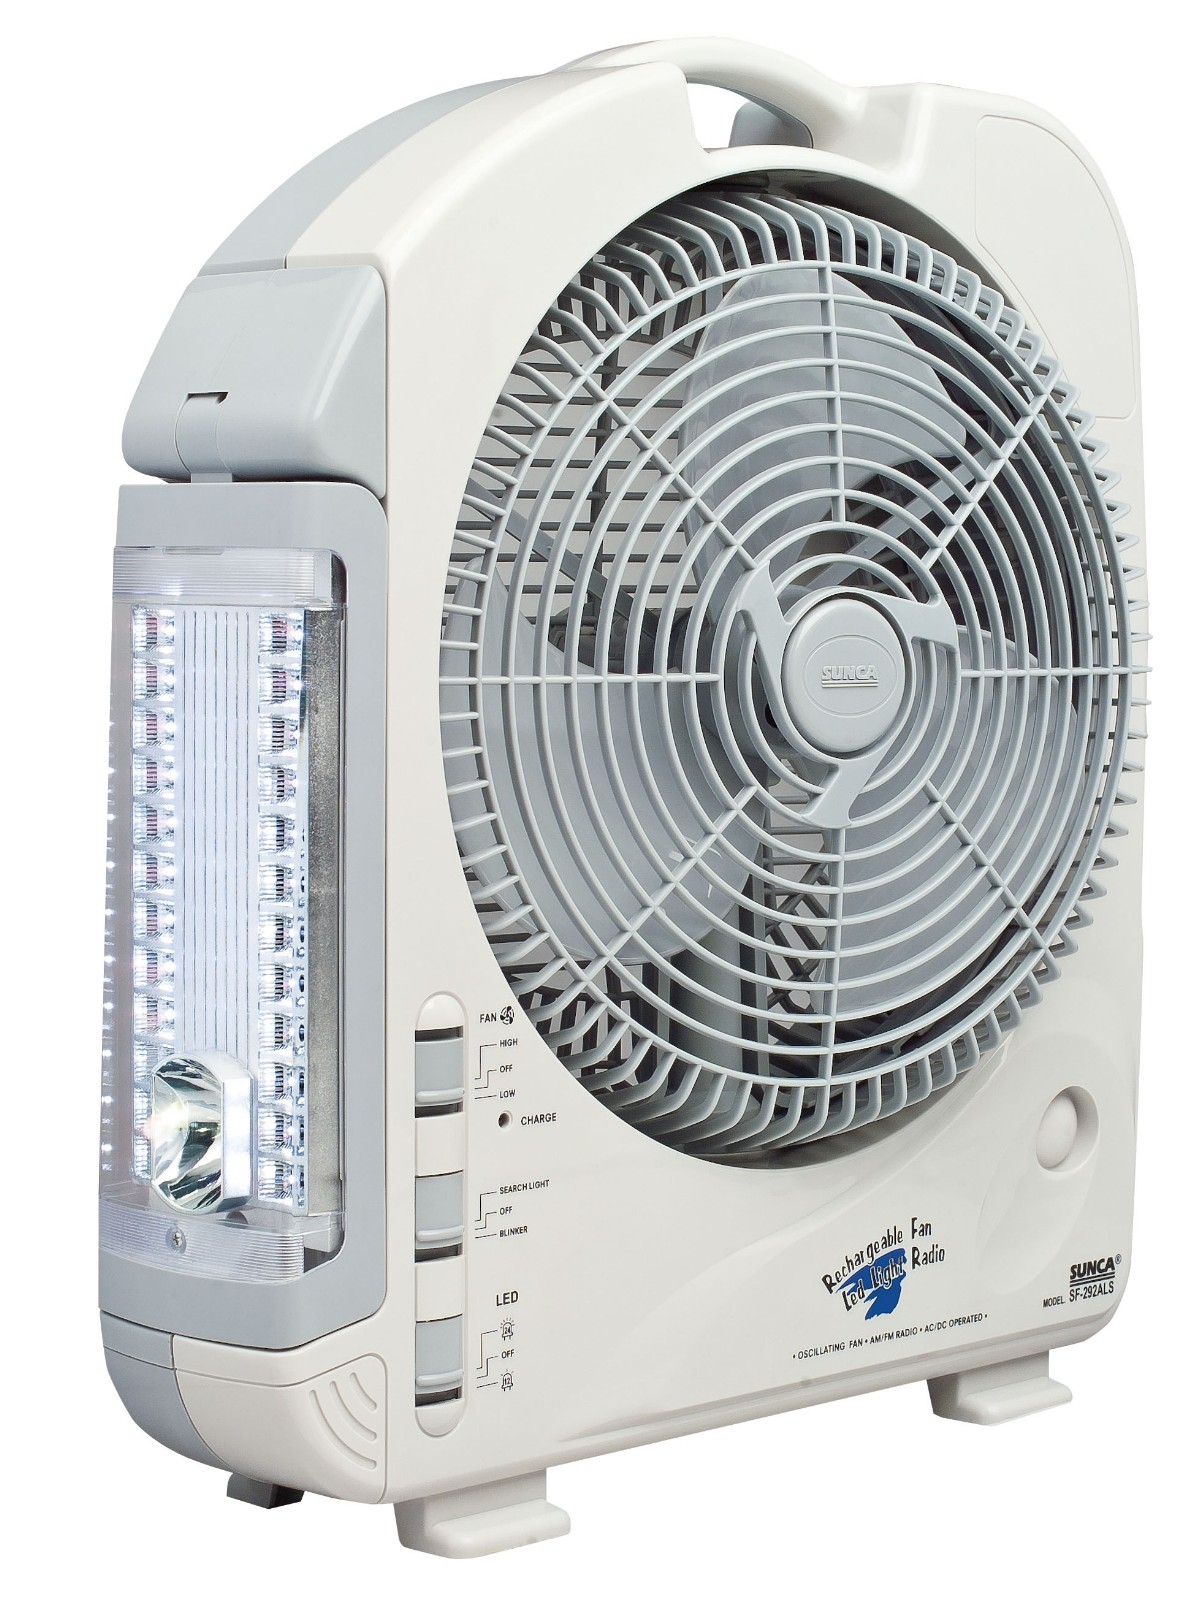 SUNCA 12 INCH SF-292ALs TABLE FAN WITH LED NIGHT LIGHT